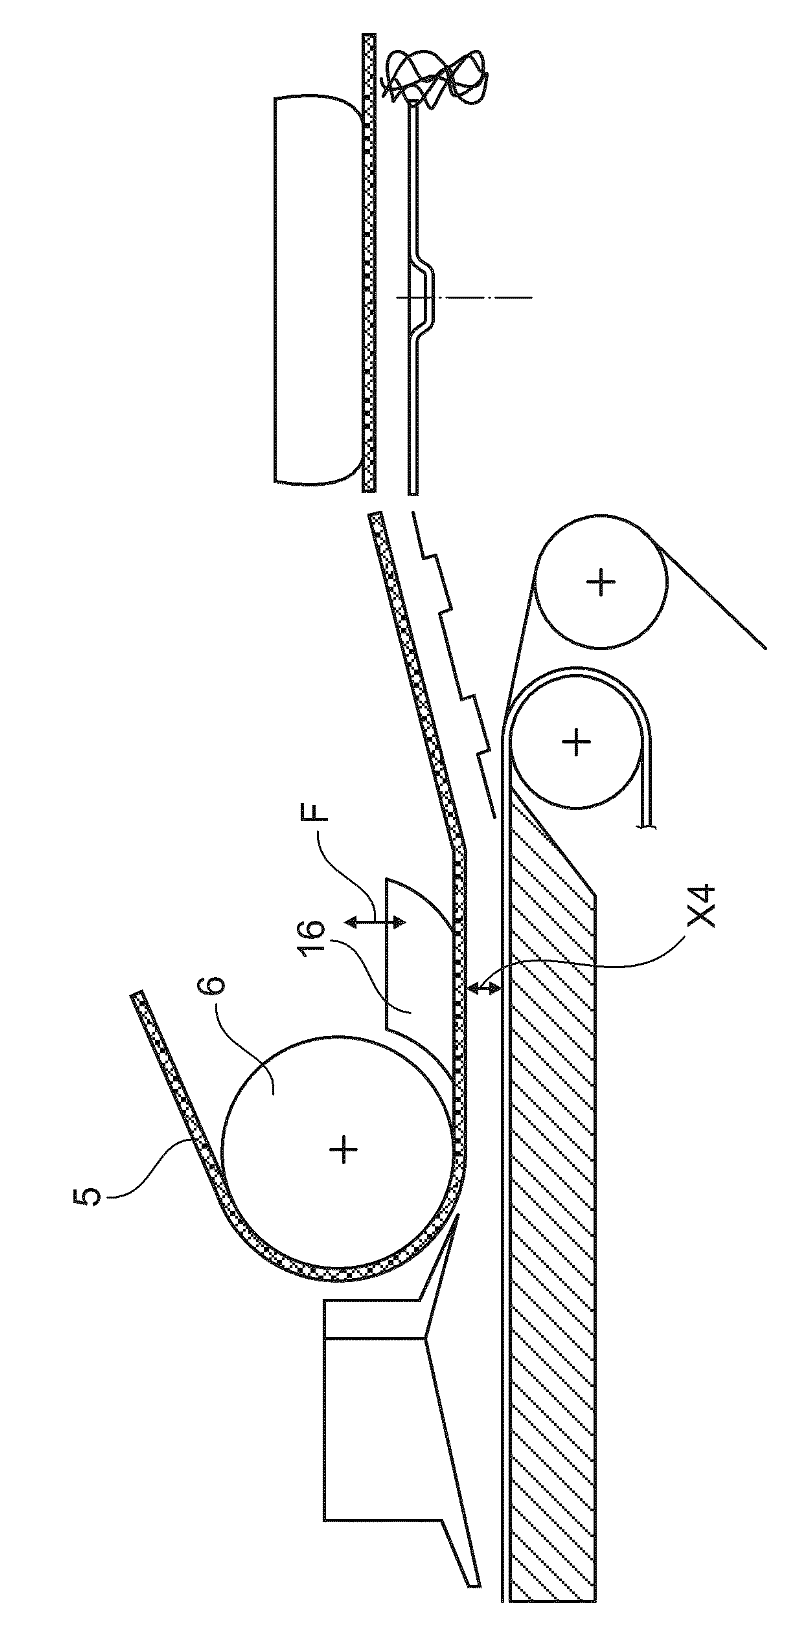 Device for producing rod-shaped articles from the tobacco processing industry